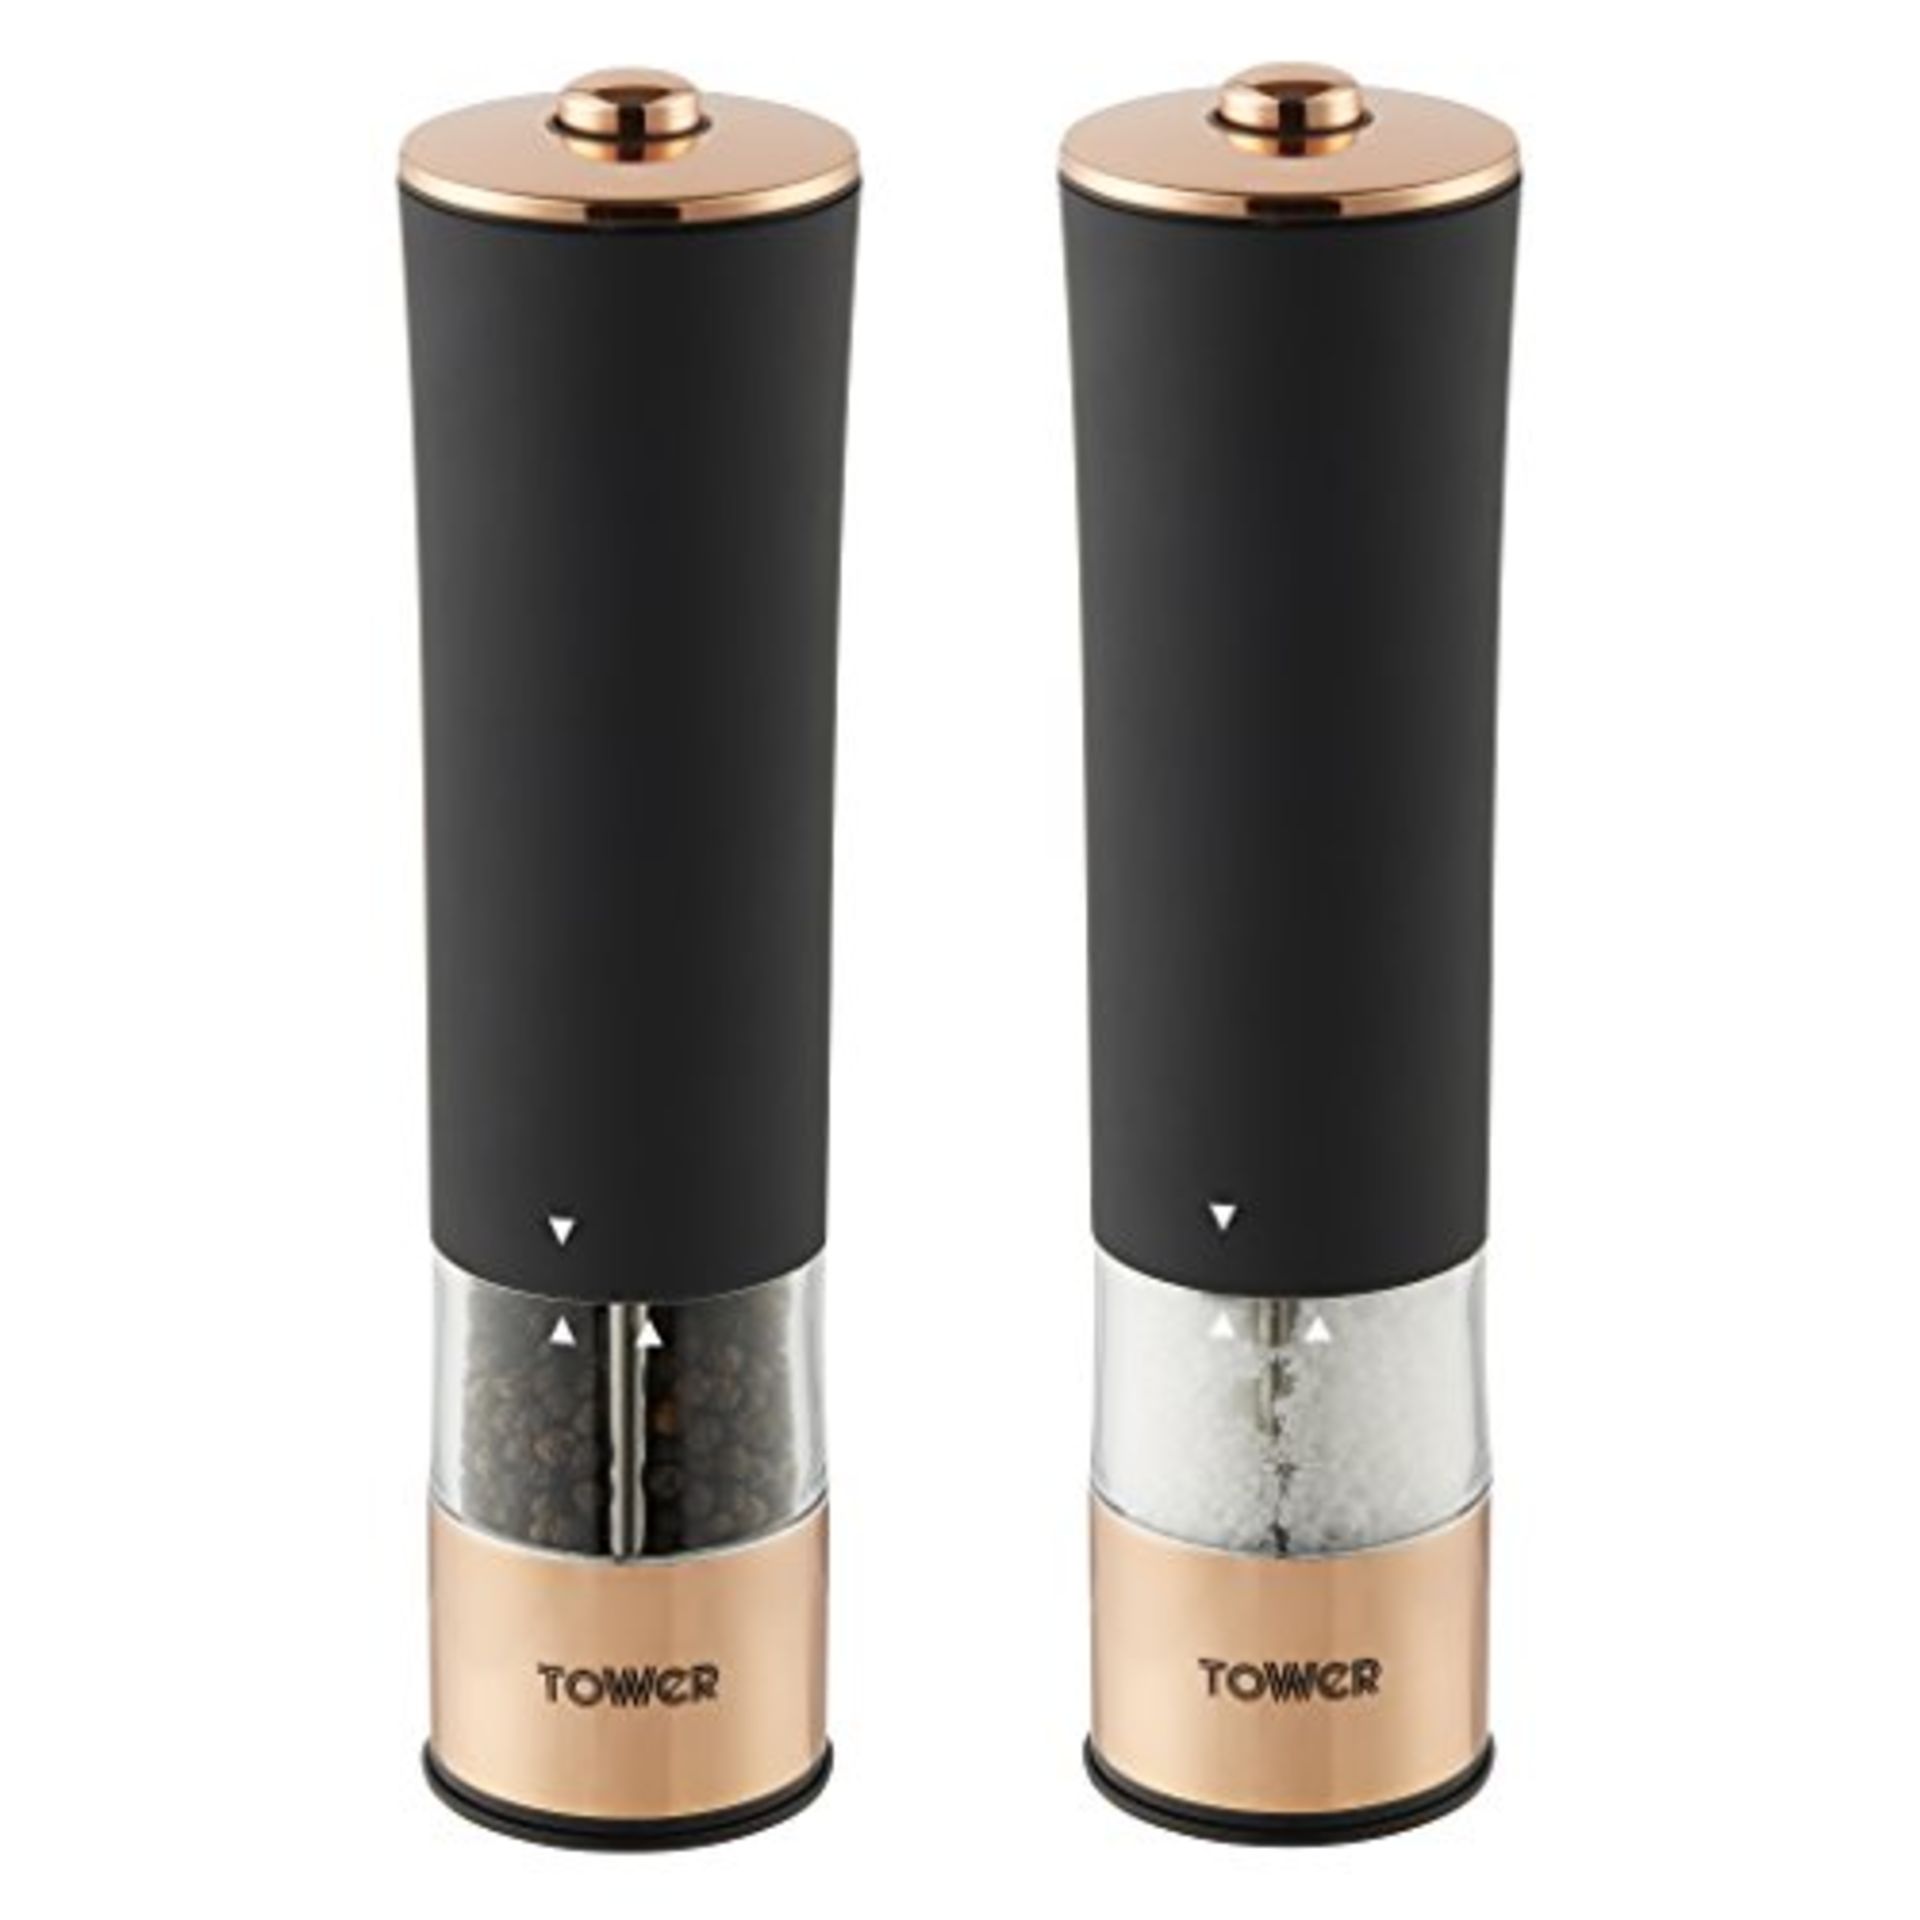 Tower T847003RB Electric Salt and Pepper Mill, Stainless Steel, Soft-Touch Body, Rose